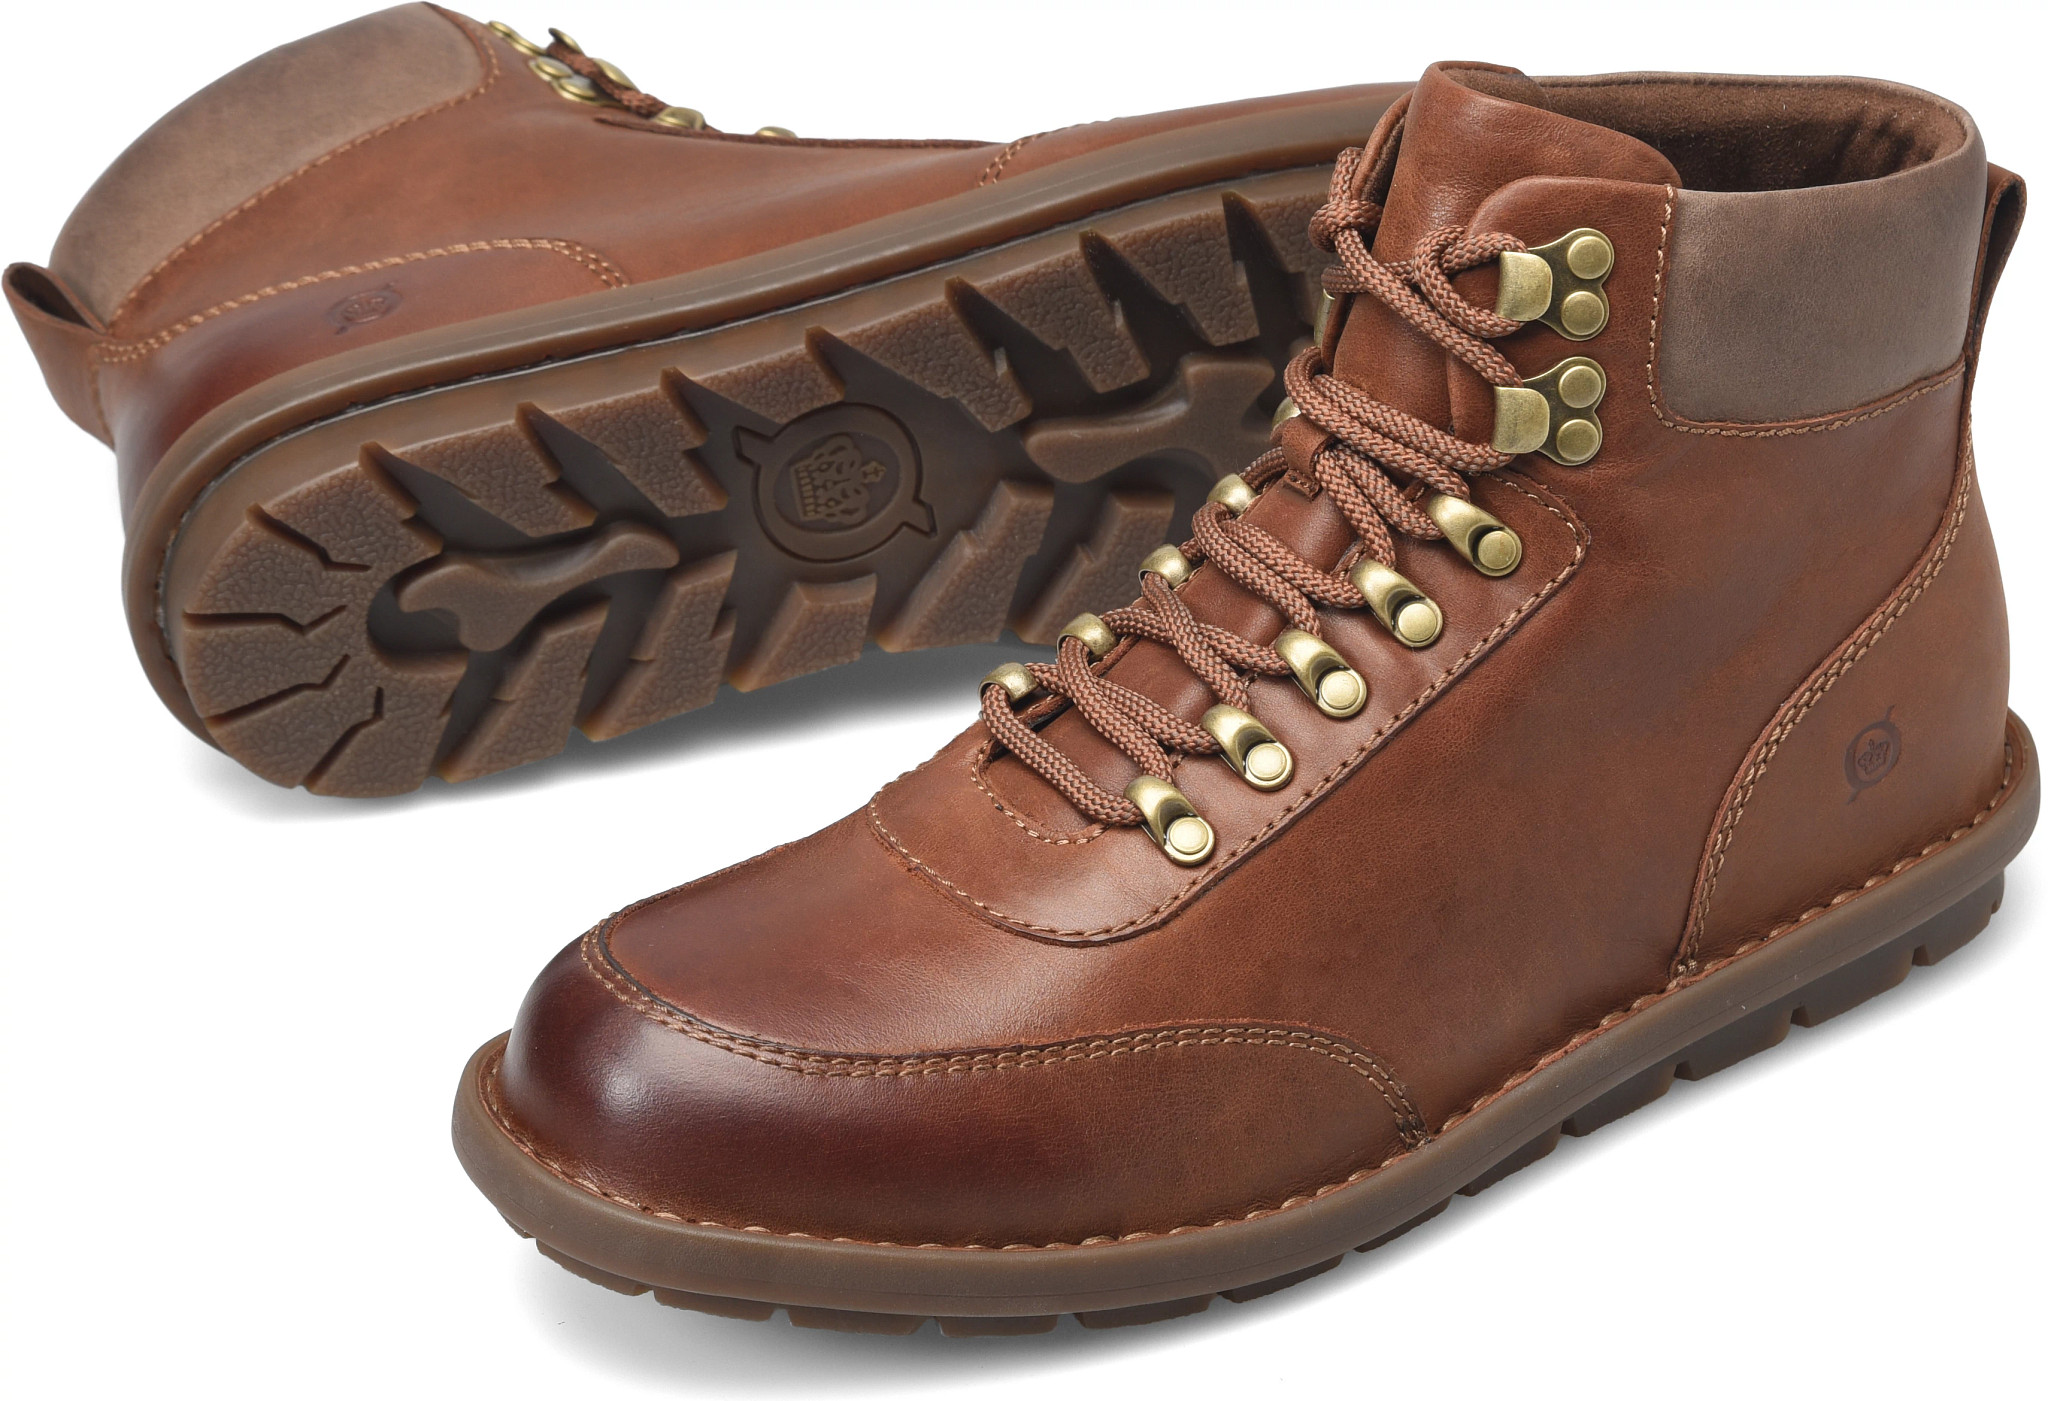 Men's Born Lace Up Comfortable Rugged Hollis Boot Lt Brown Nutmeg H56441 